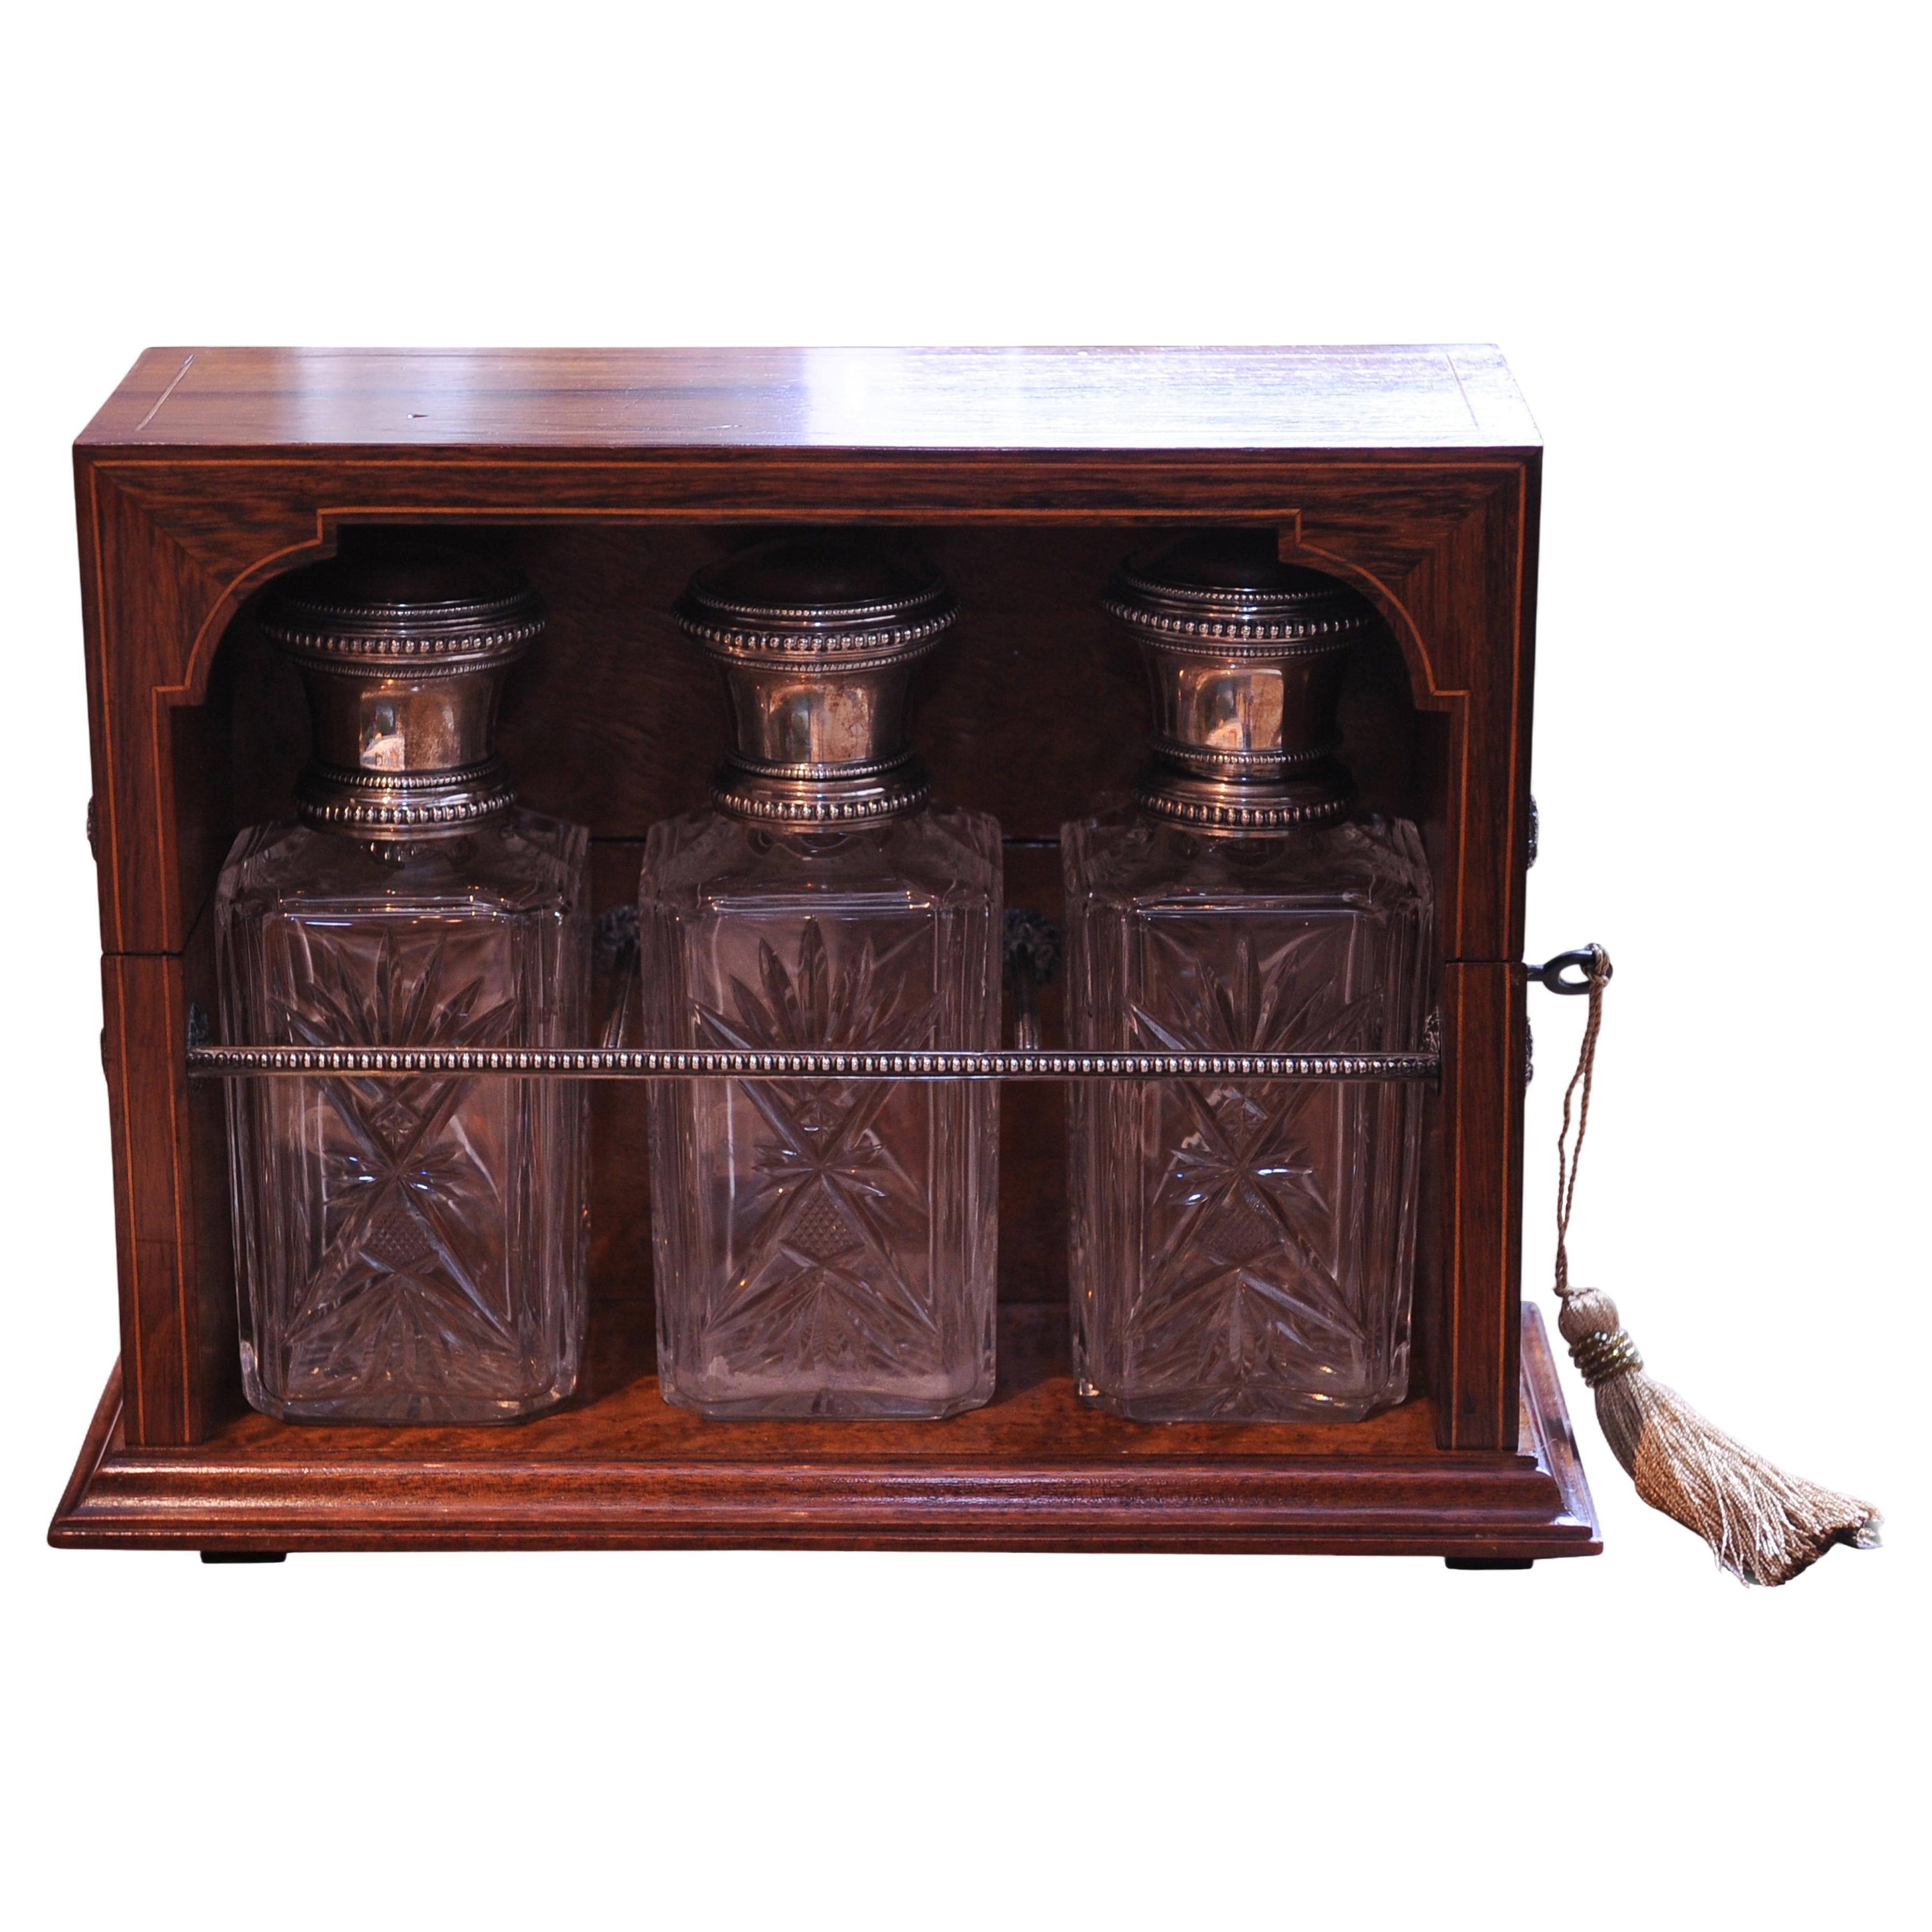 A Beautiful 19th century Continental Rosewood and Amboyna Inlaid Tantalus revealing three cut glass decanters with silver trims & lids.

Decanters Are Revealed Inside Via a Silver-Plate on Brass Piano Hinge With Side Decorative Cast Roundels &